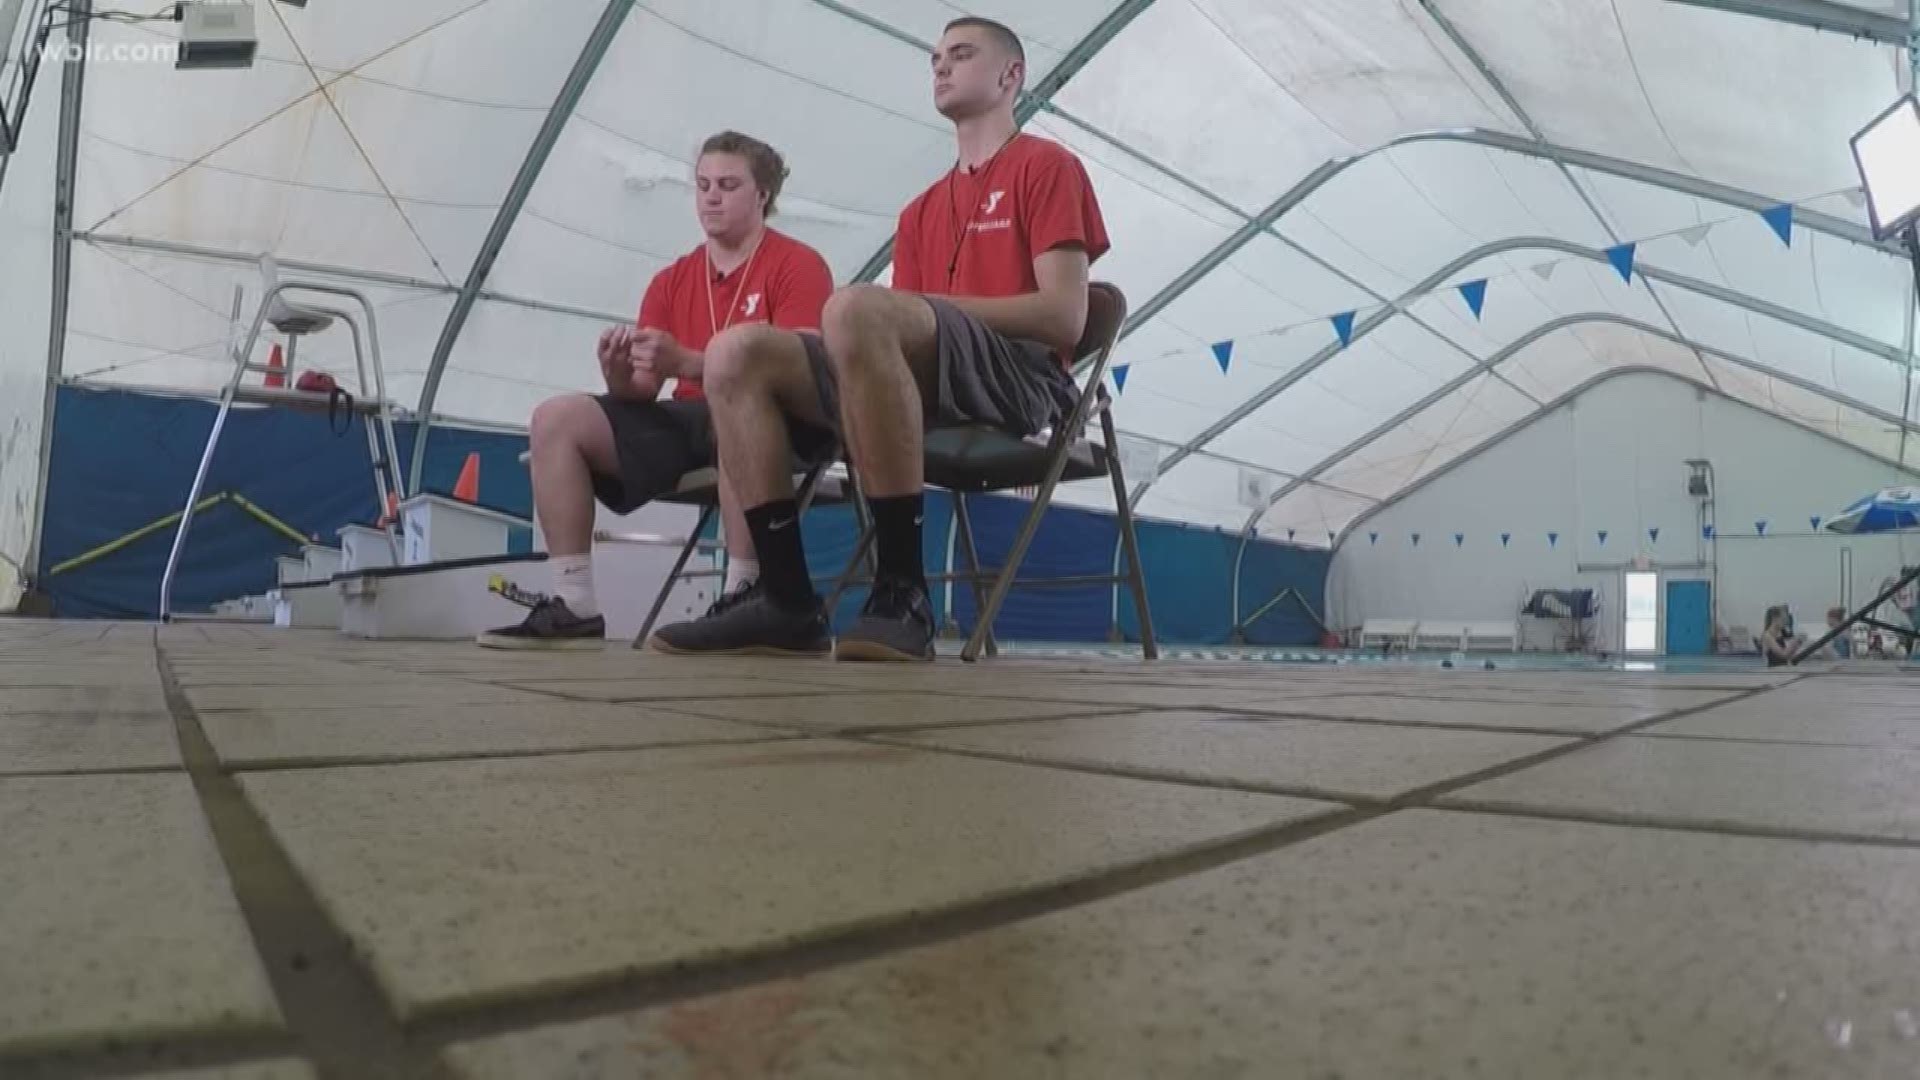 April 25, 2018: When a man collapsed from a heart attack at a Knoxville YMCA, two teenage lifeguards stepped in to help.